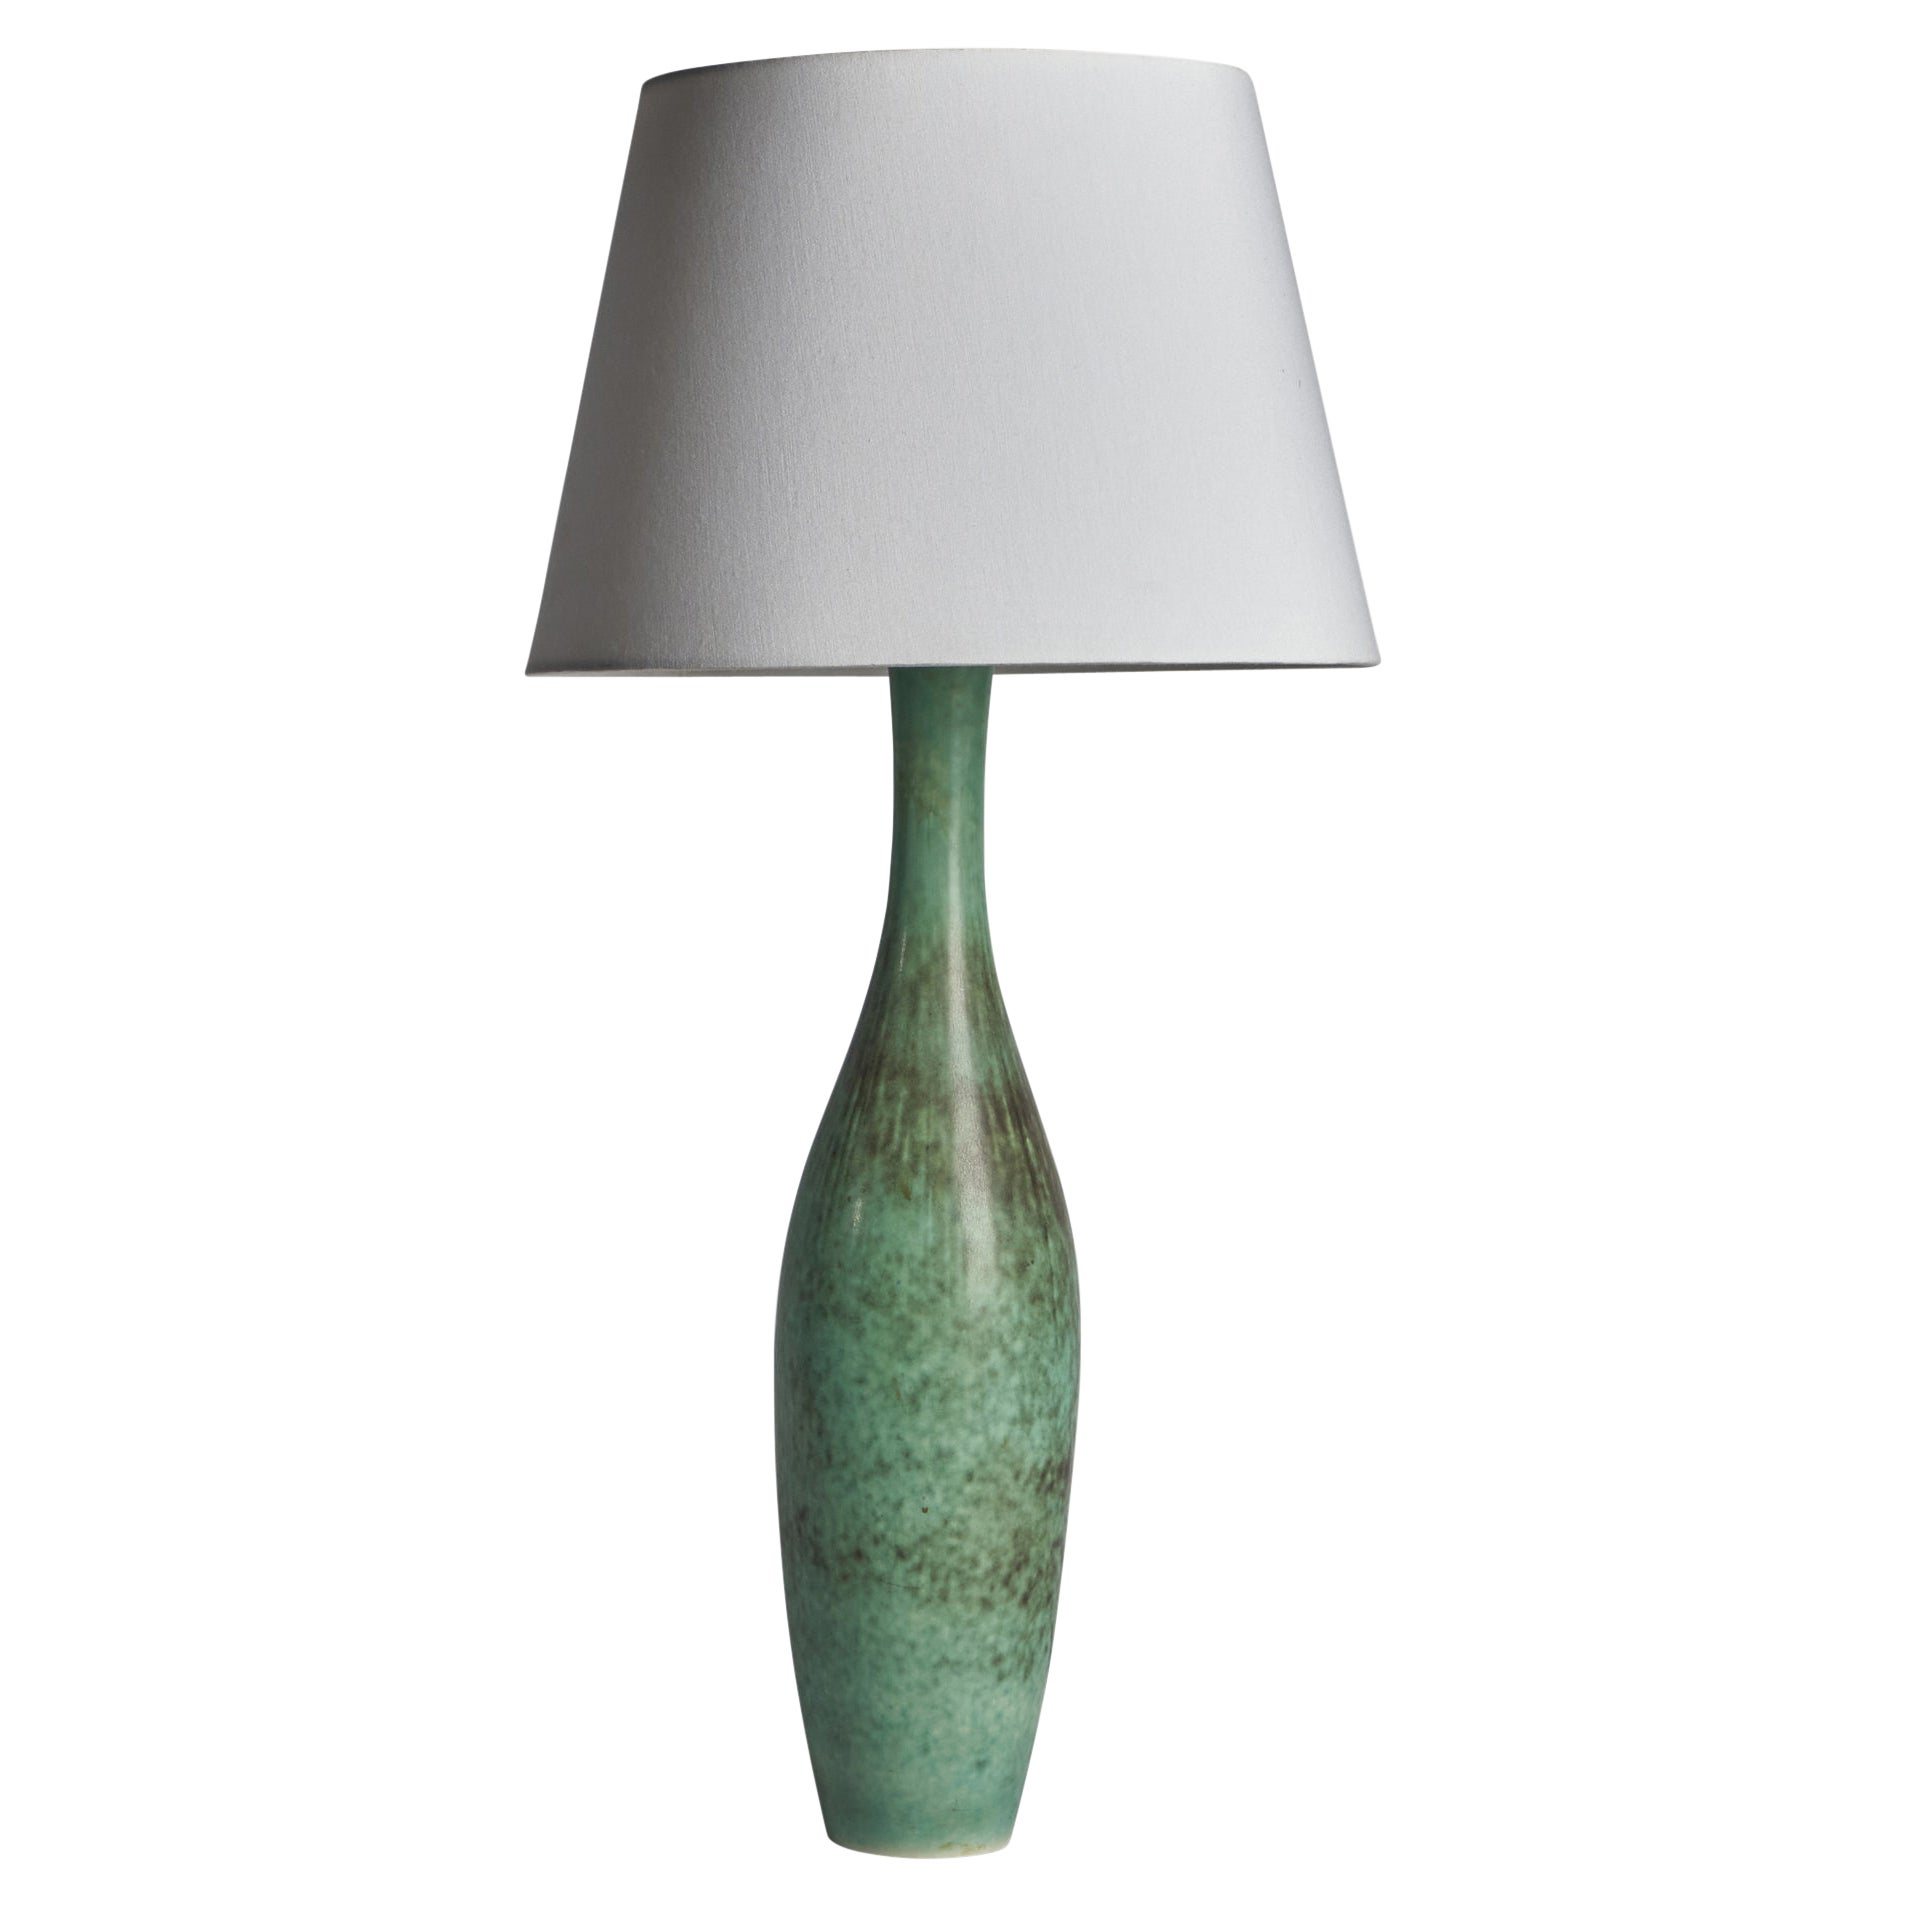 Carl-Harry Stålhane, Sizeable Table Lamp, Stoneware, Sweden, 1950s For Sale